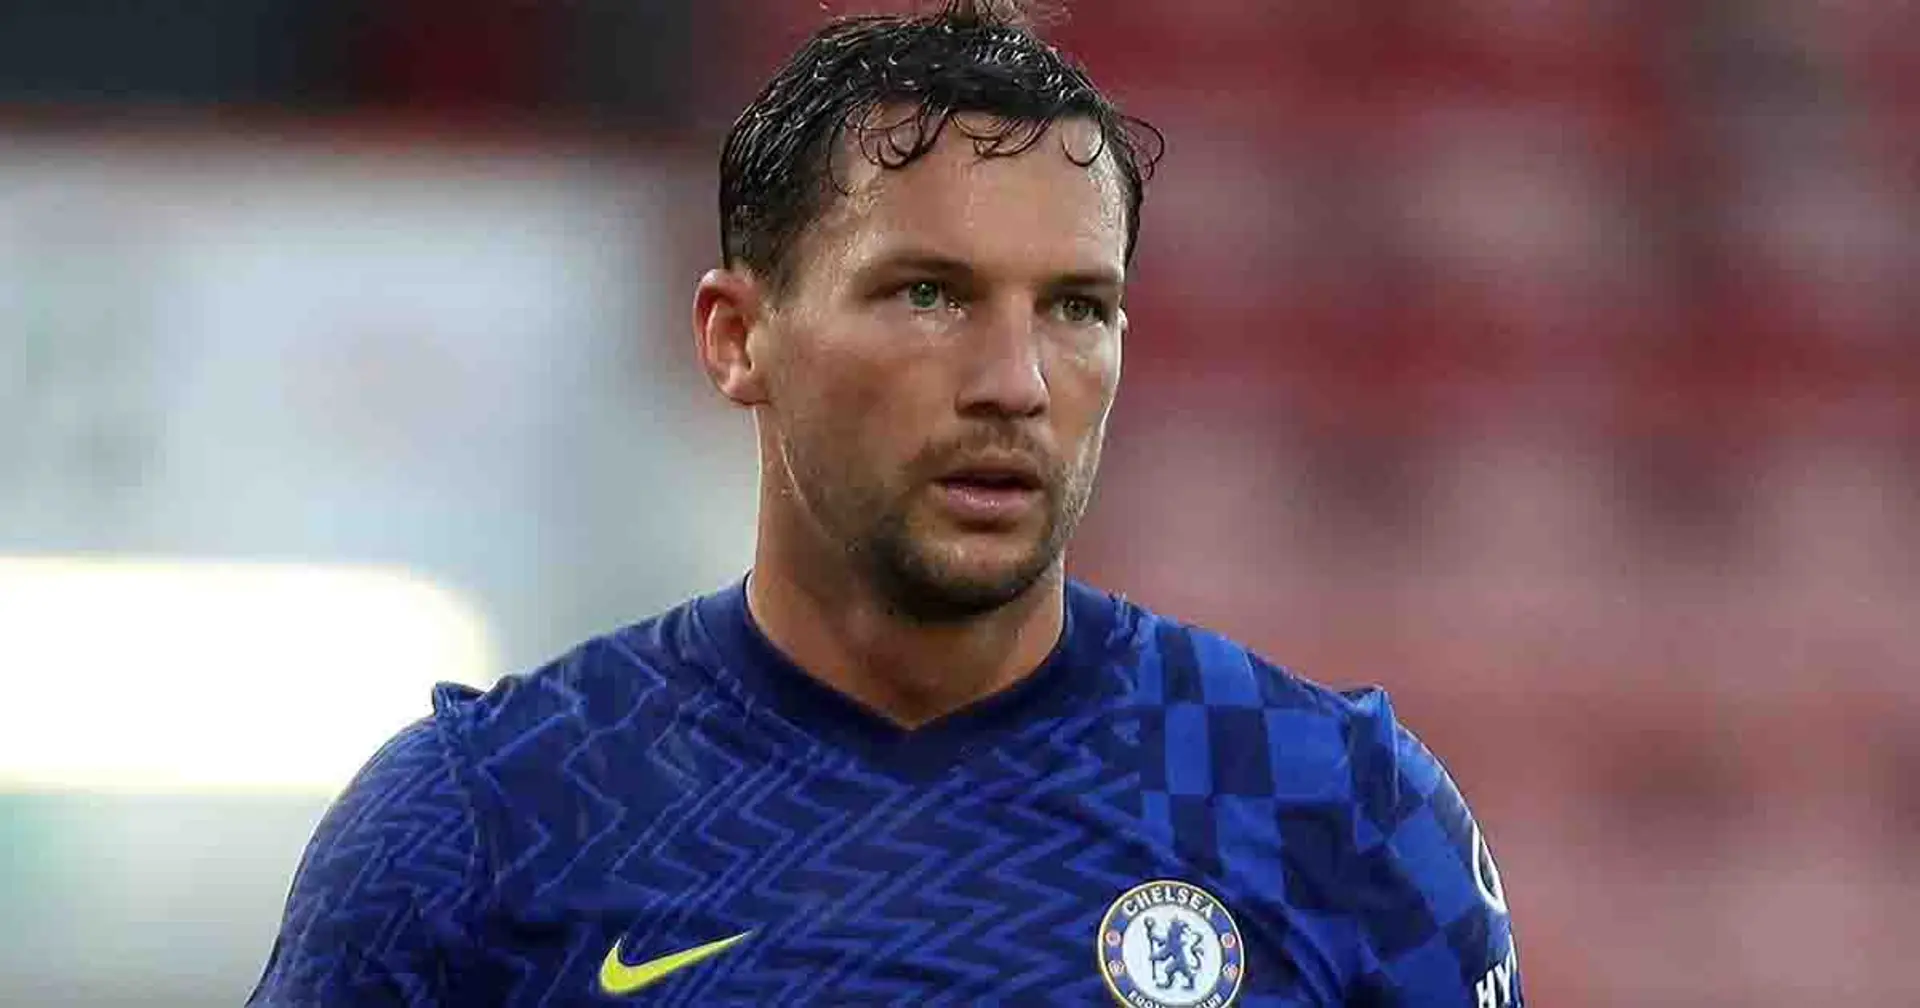 'I've got to stop': Former Chelsea midfielder Danny Drinkwater reveals why he’s retiring at the age of 33